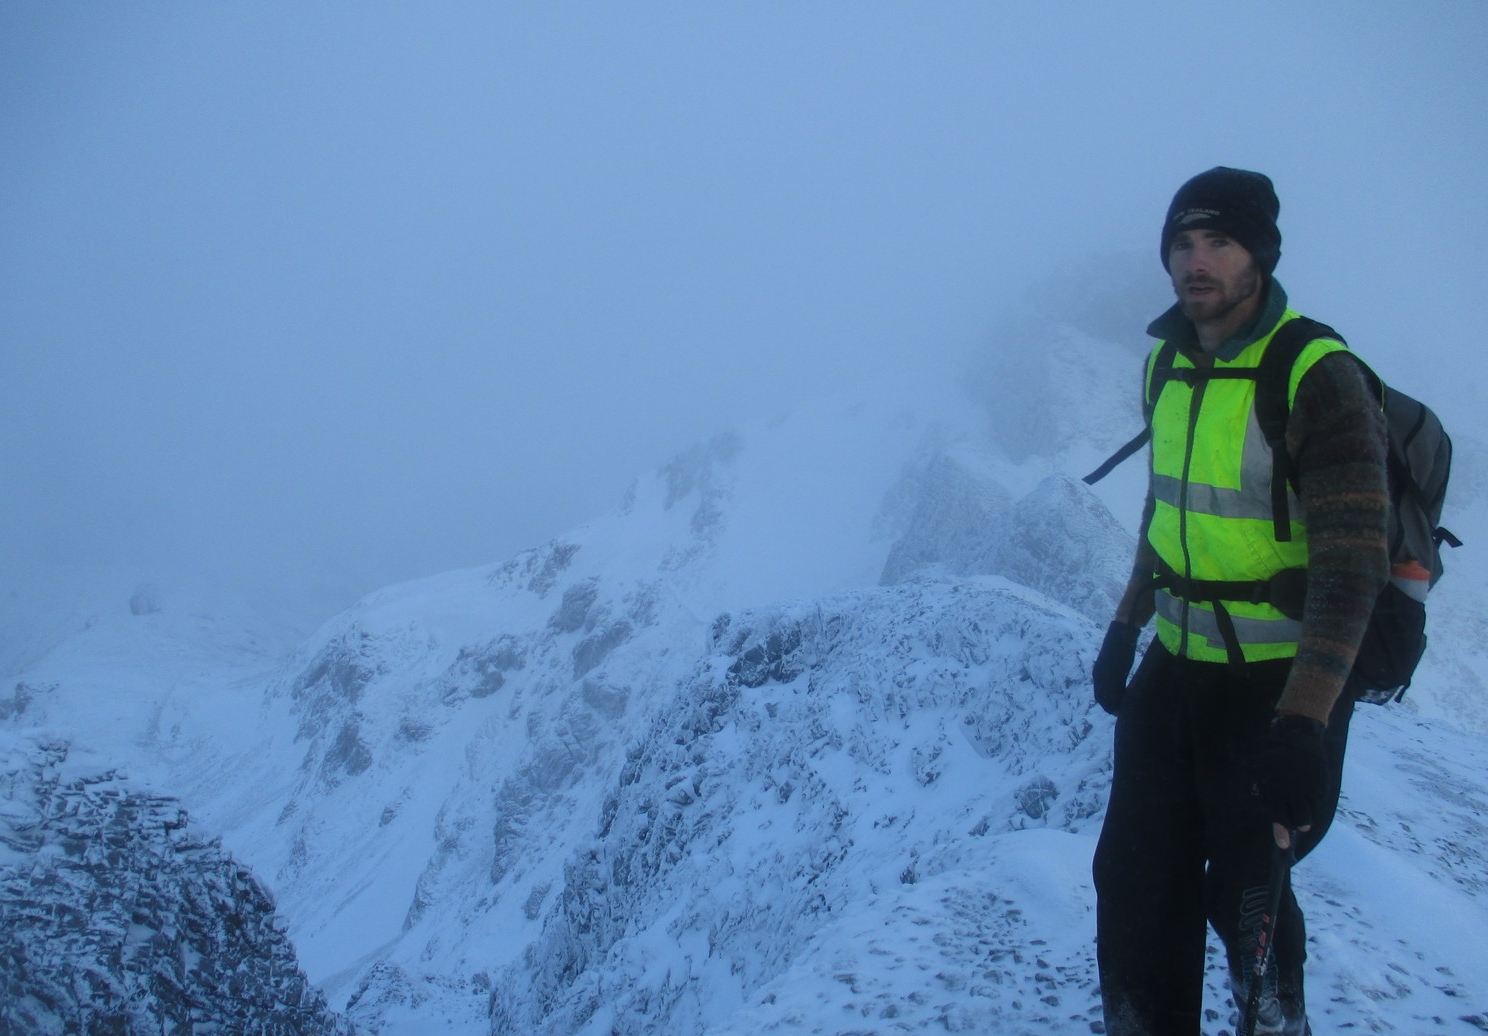   Carl in late Spring storm on Mt Arthur 2014  